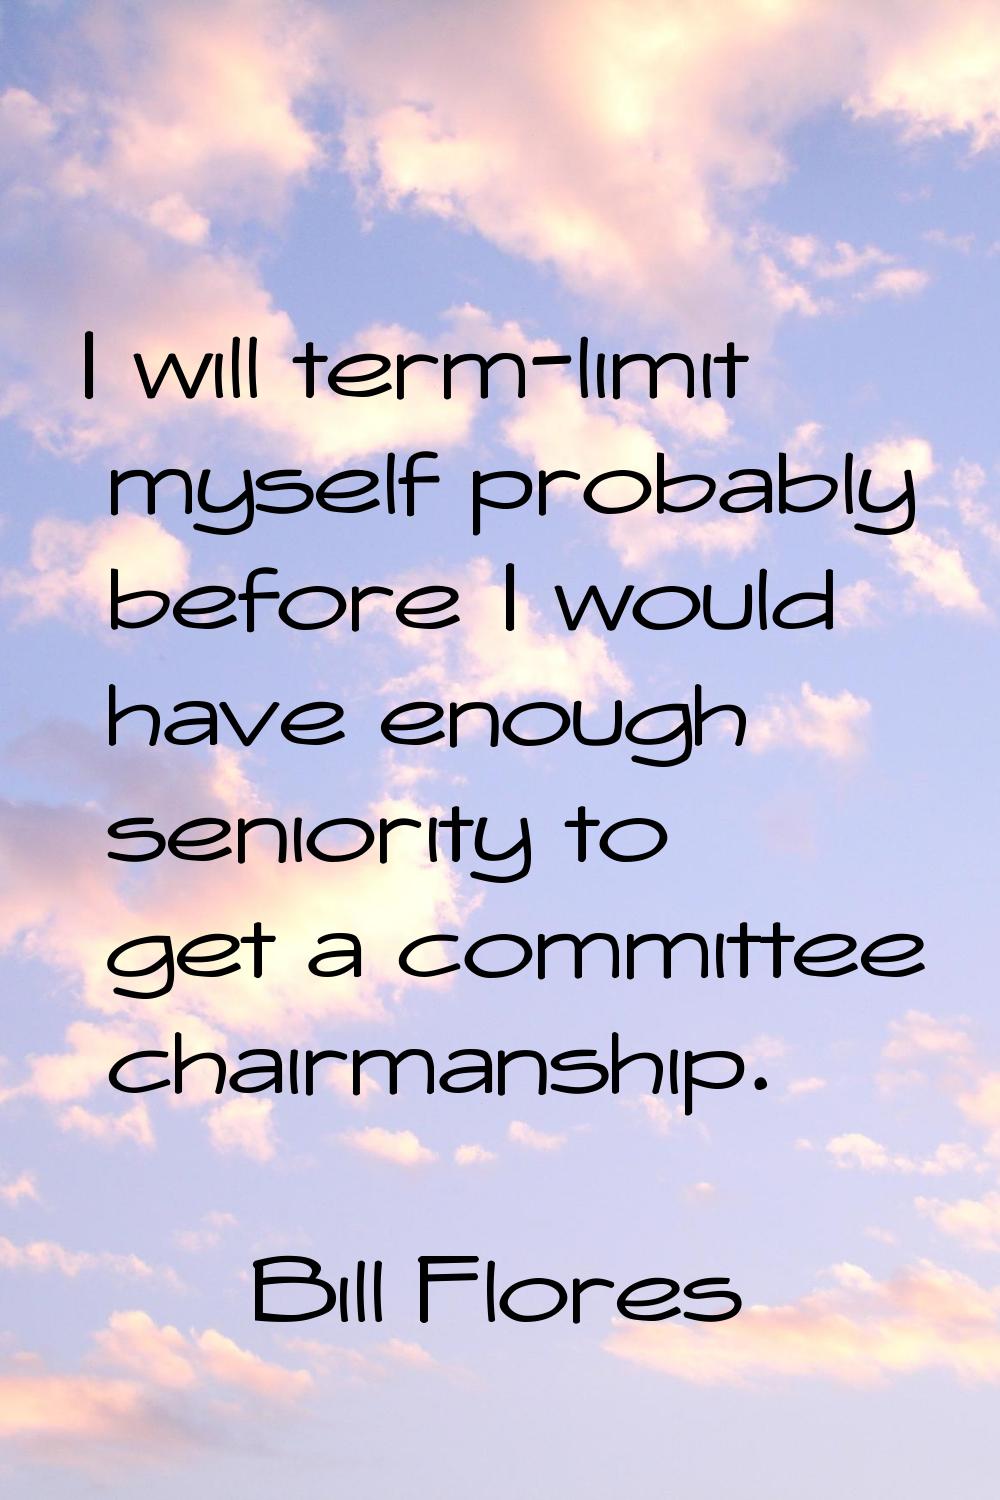 I will term-limit myself probably before I would have enough seniority to get a committee chairmans